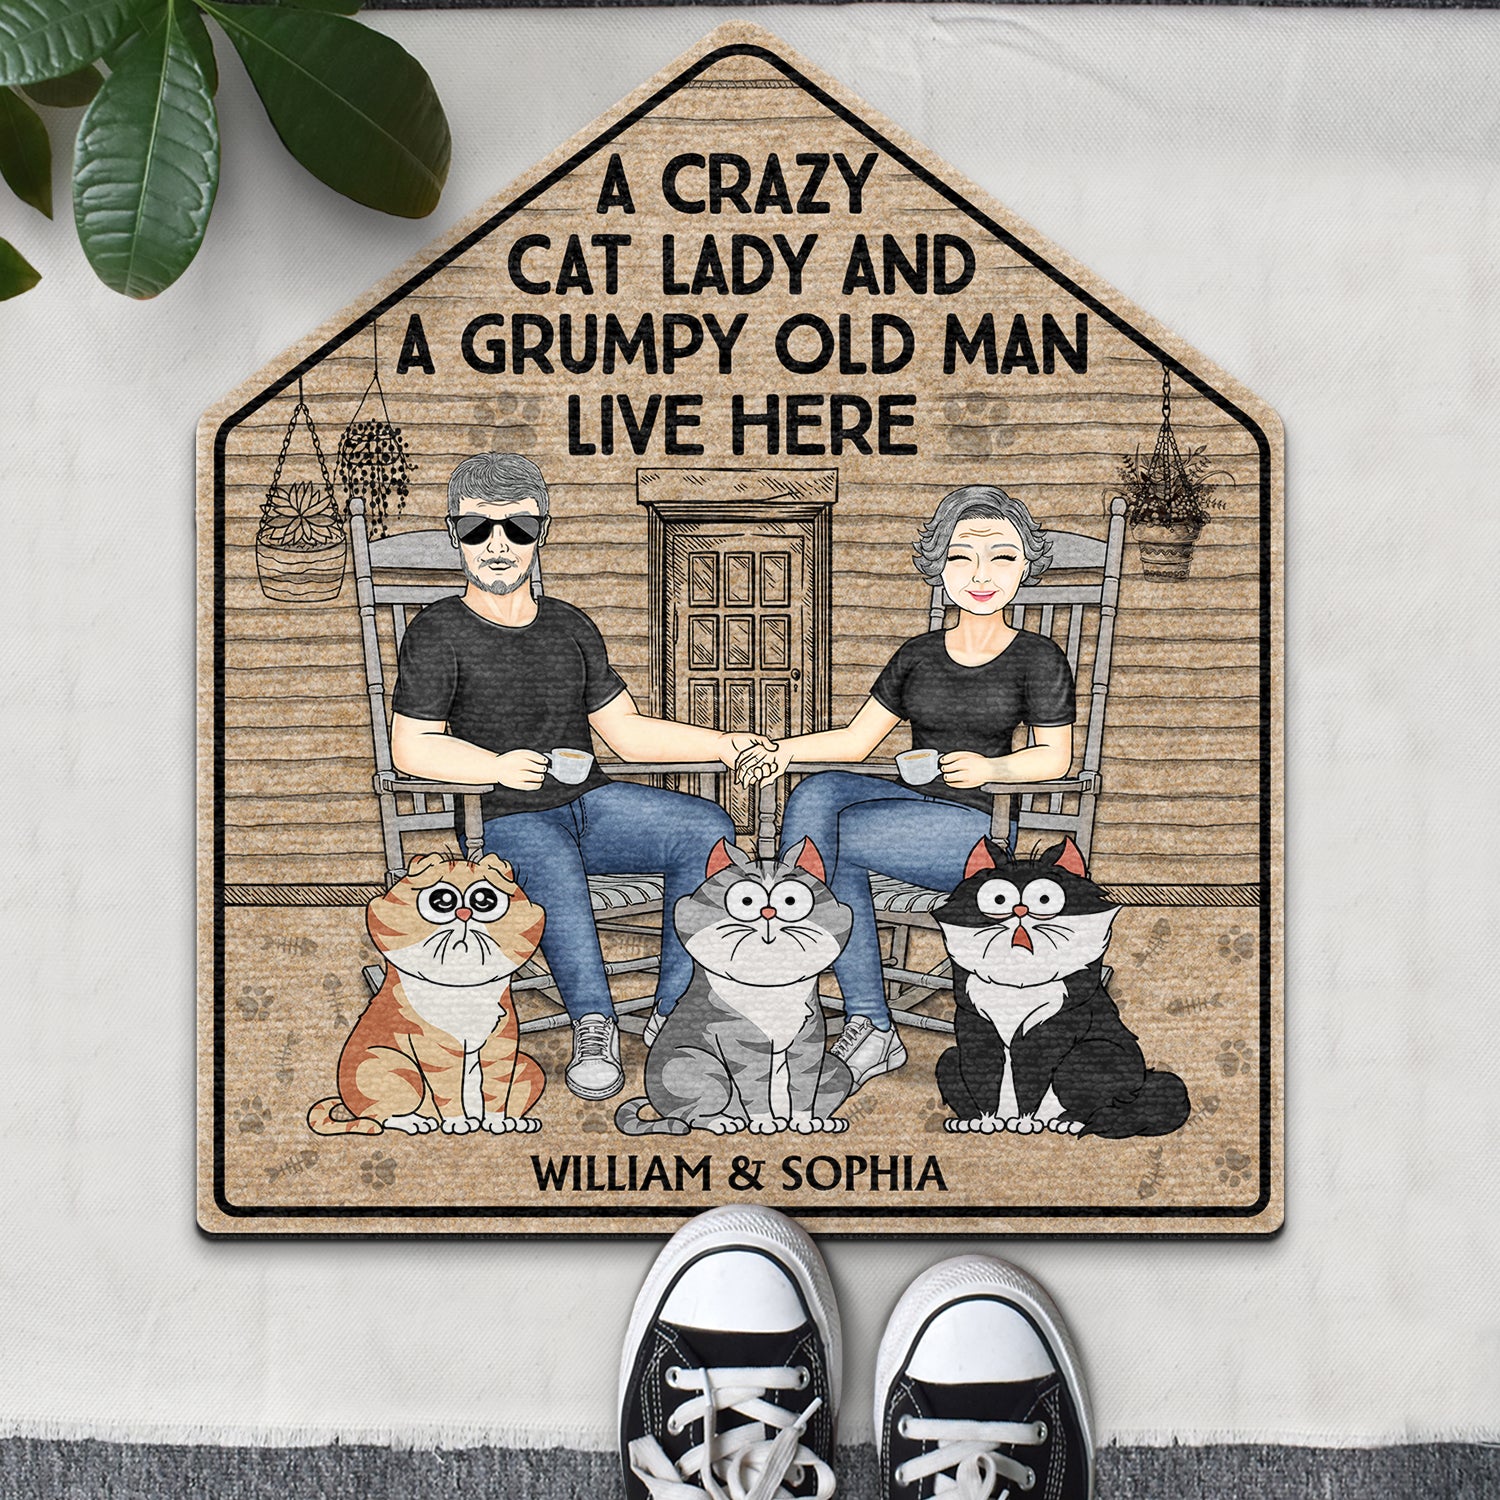 A Crazy Cat Lady And Her Grumpy Old Man Live Here - Gift For Couples, Pet Lovers And Family - Personalized Custom Shaped Doormat